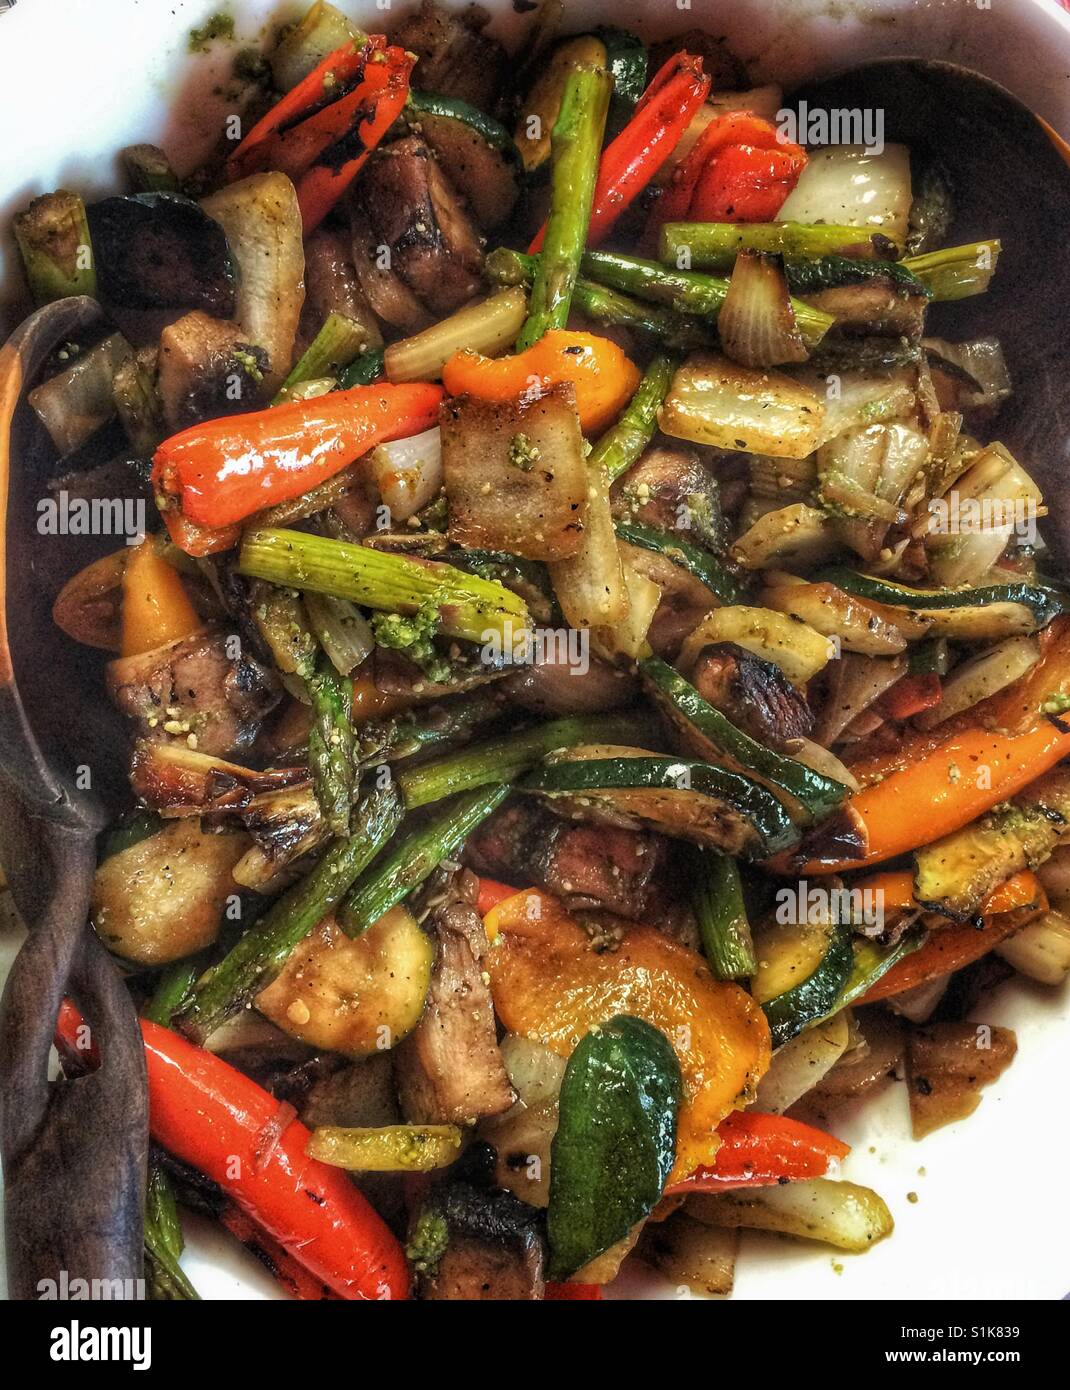 Mixed grilled vegetables. Stock Photo